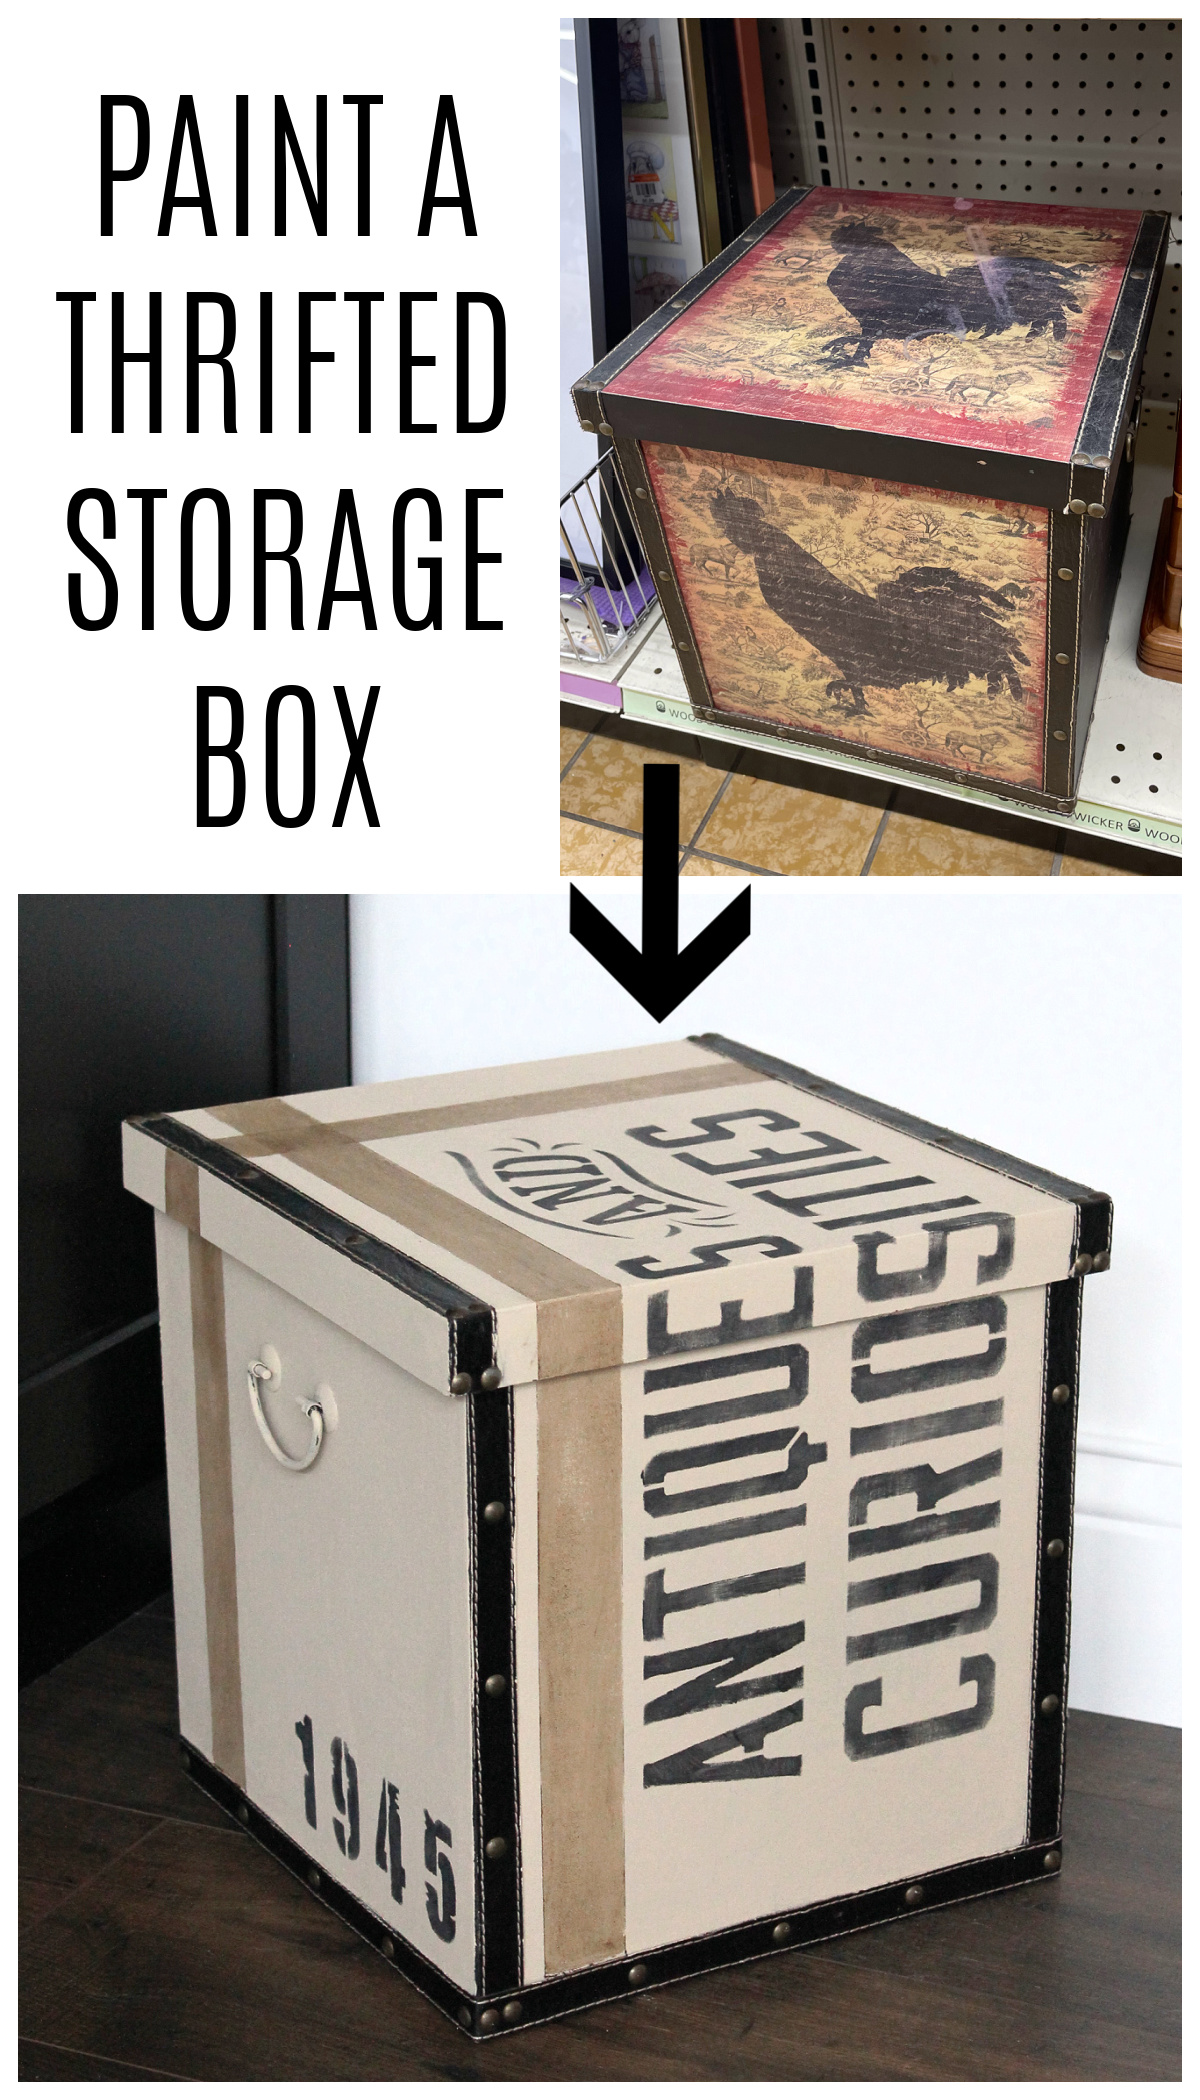 How to paint and stencil a thrifted storage box for a vintage industrial makeover. By Girl in the Garage